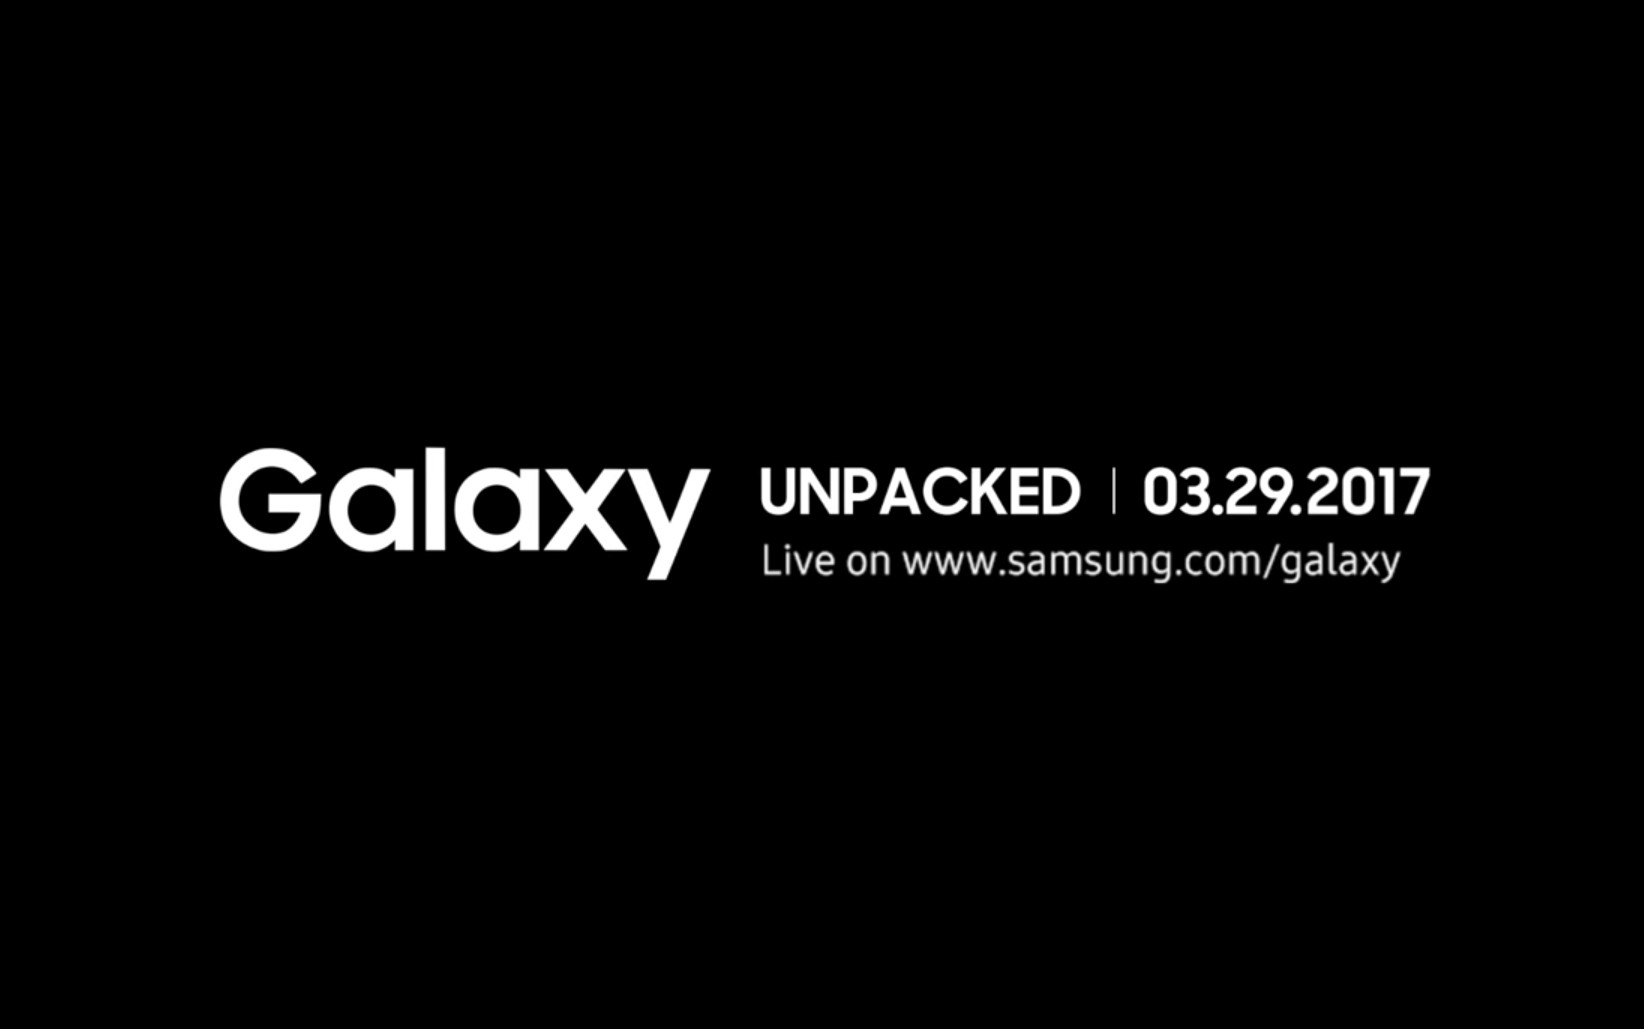 samsung releases galaxy s8 video teaser confirms march 29 announcement 513321 2